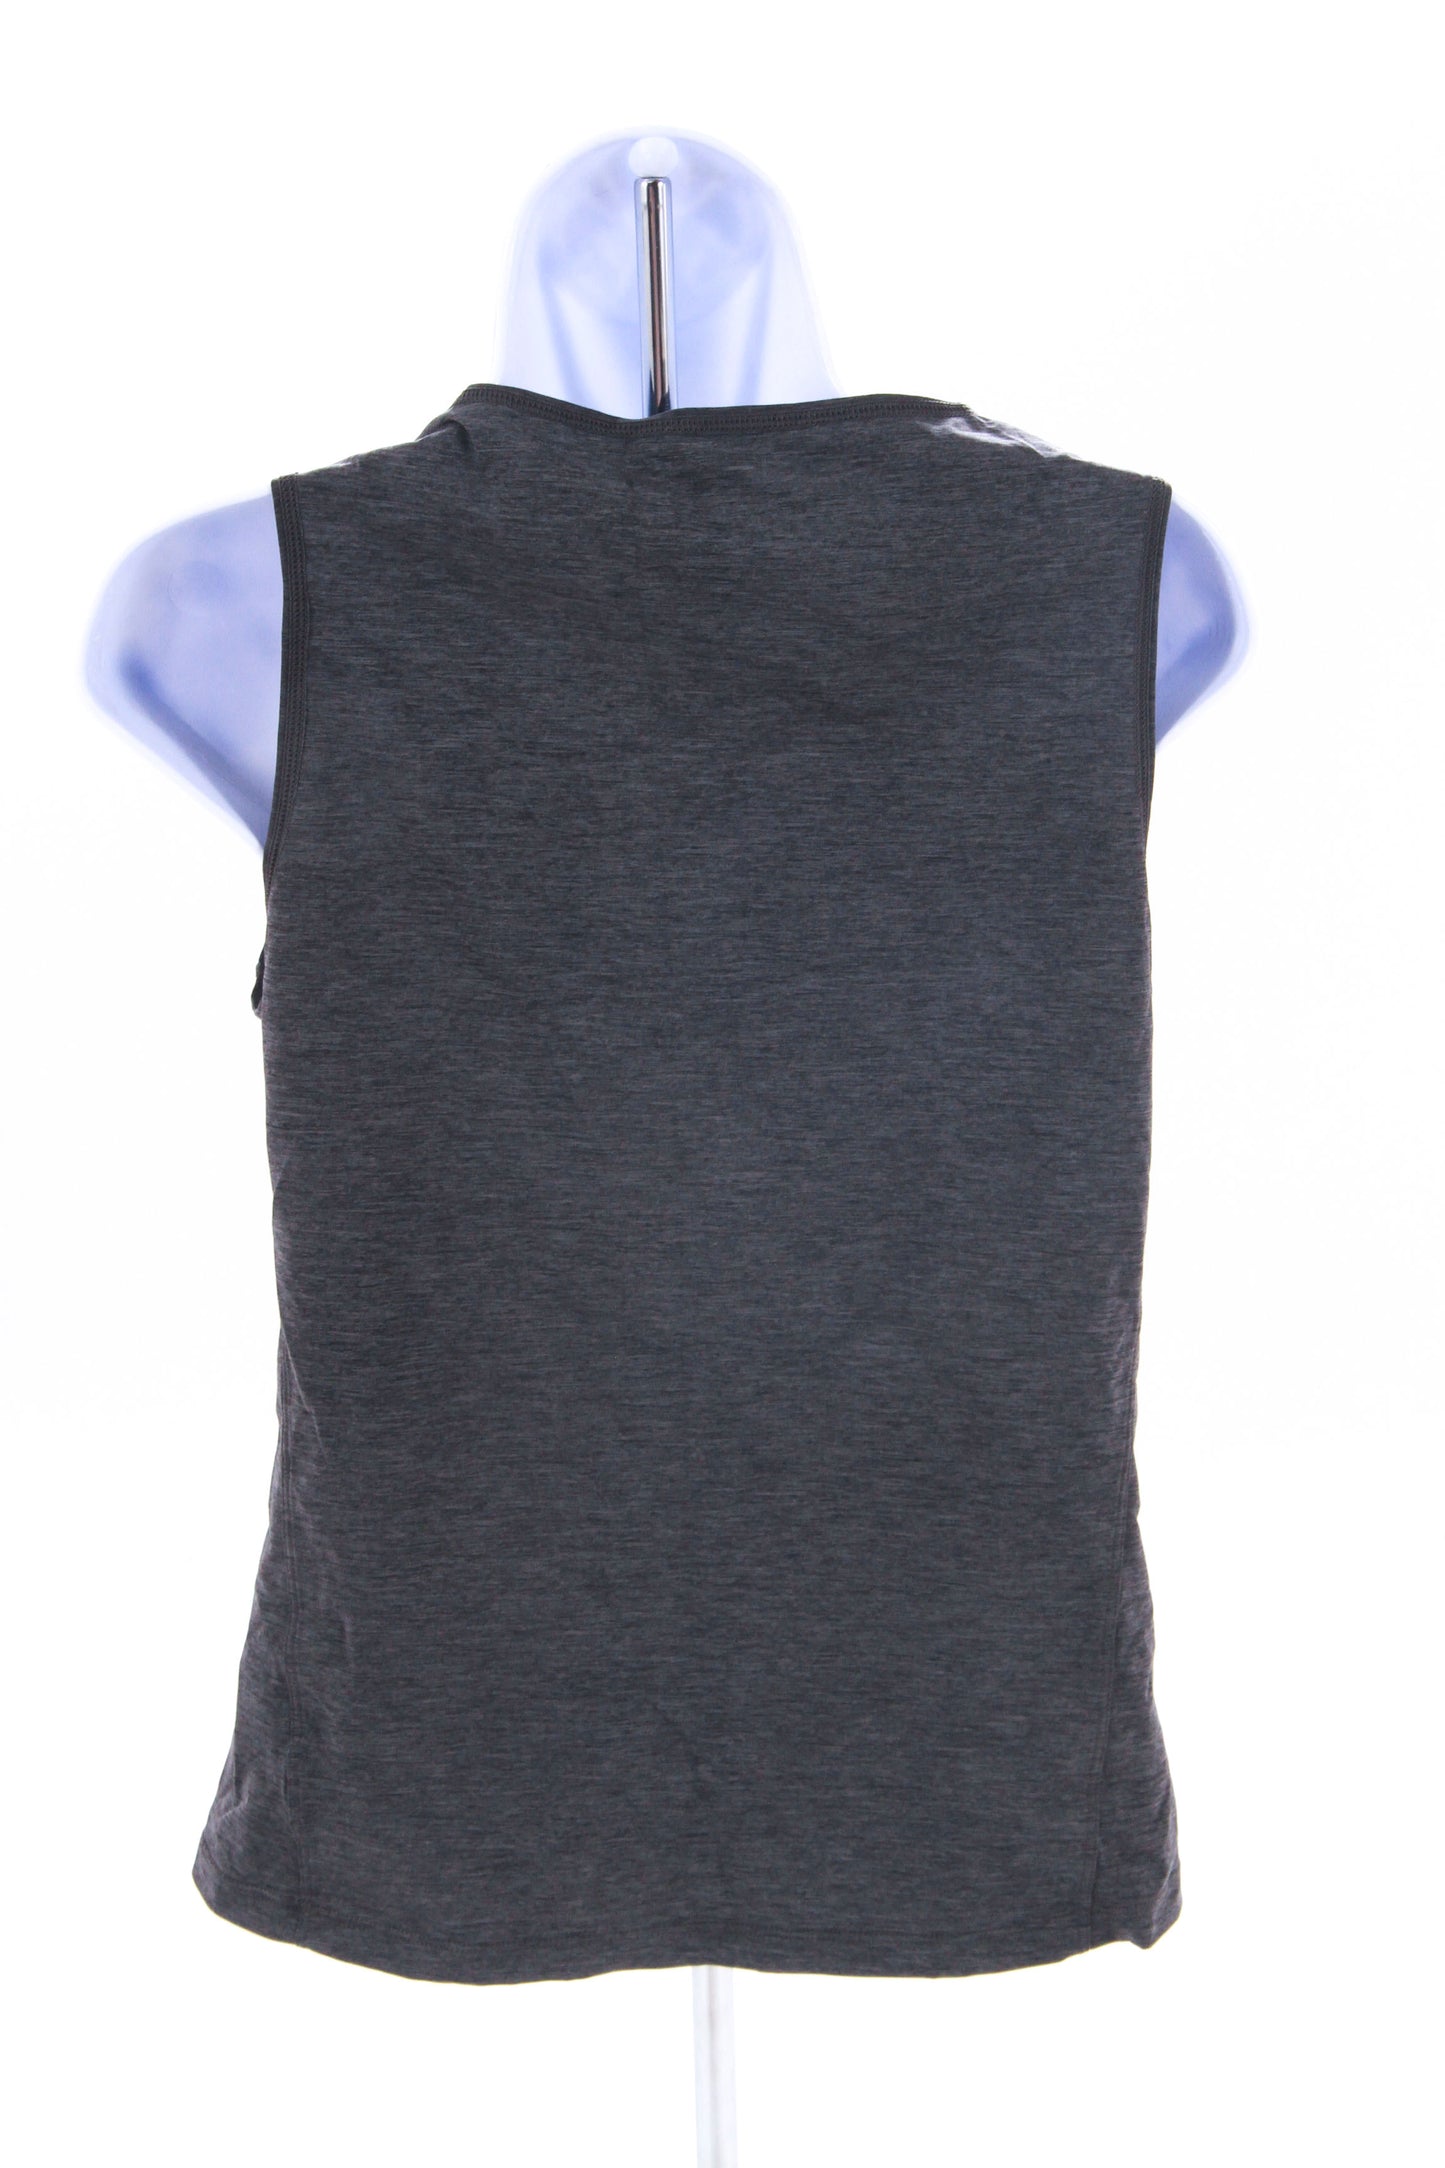 NEW (without tags) Machines for Freedom Luxe Sleeveless Base Layer Women's Large